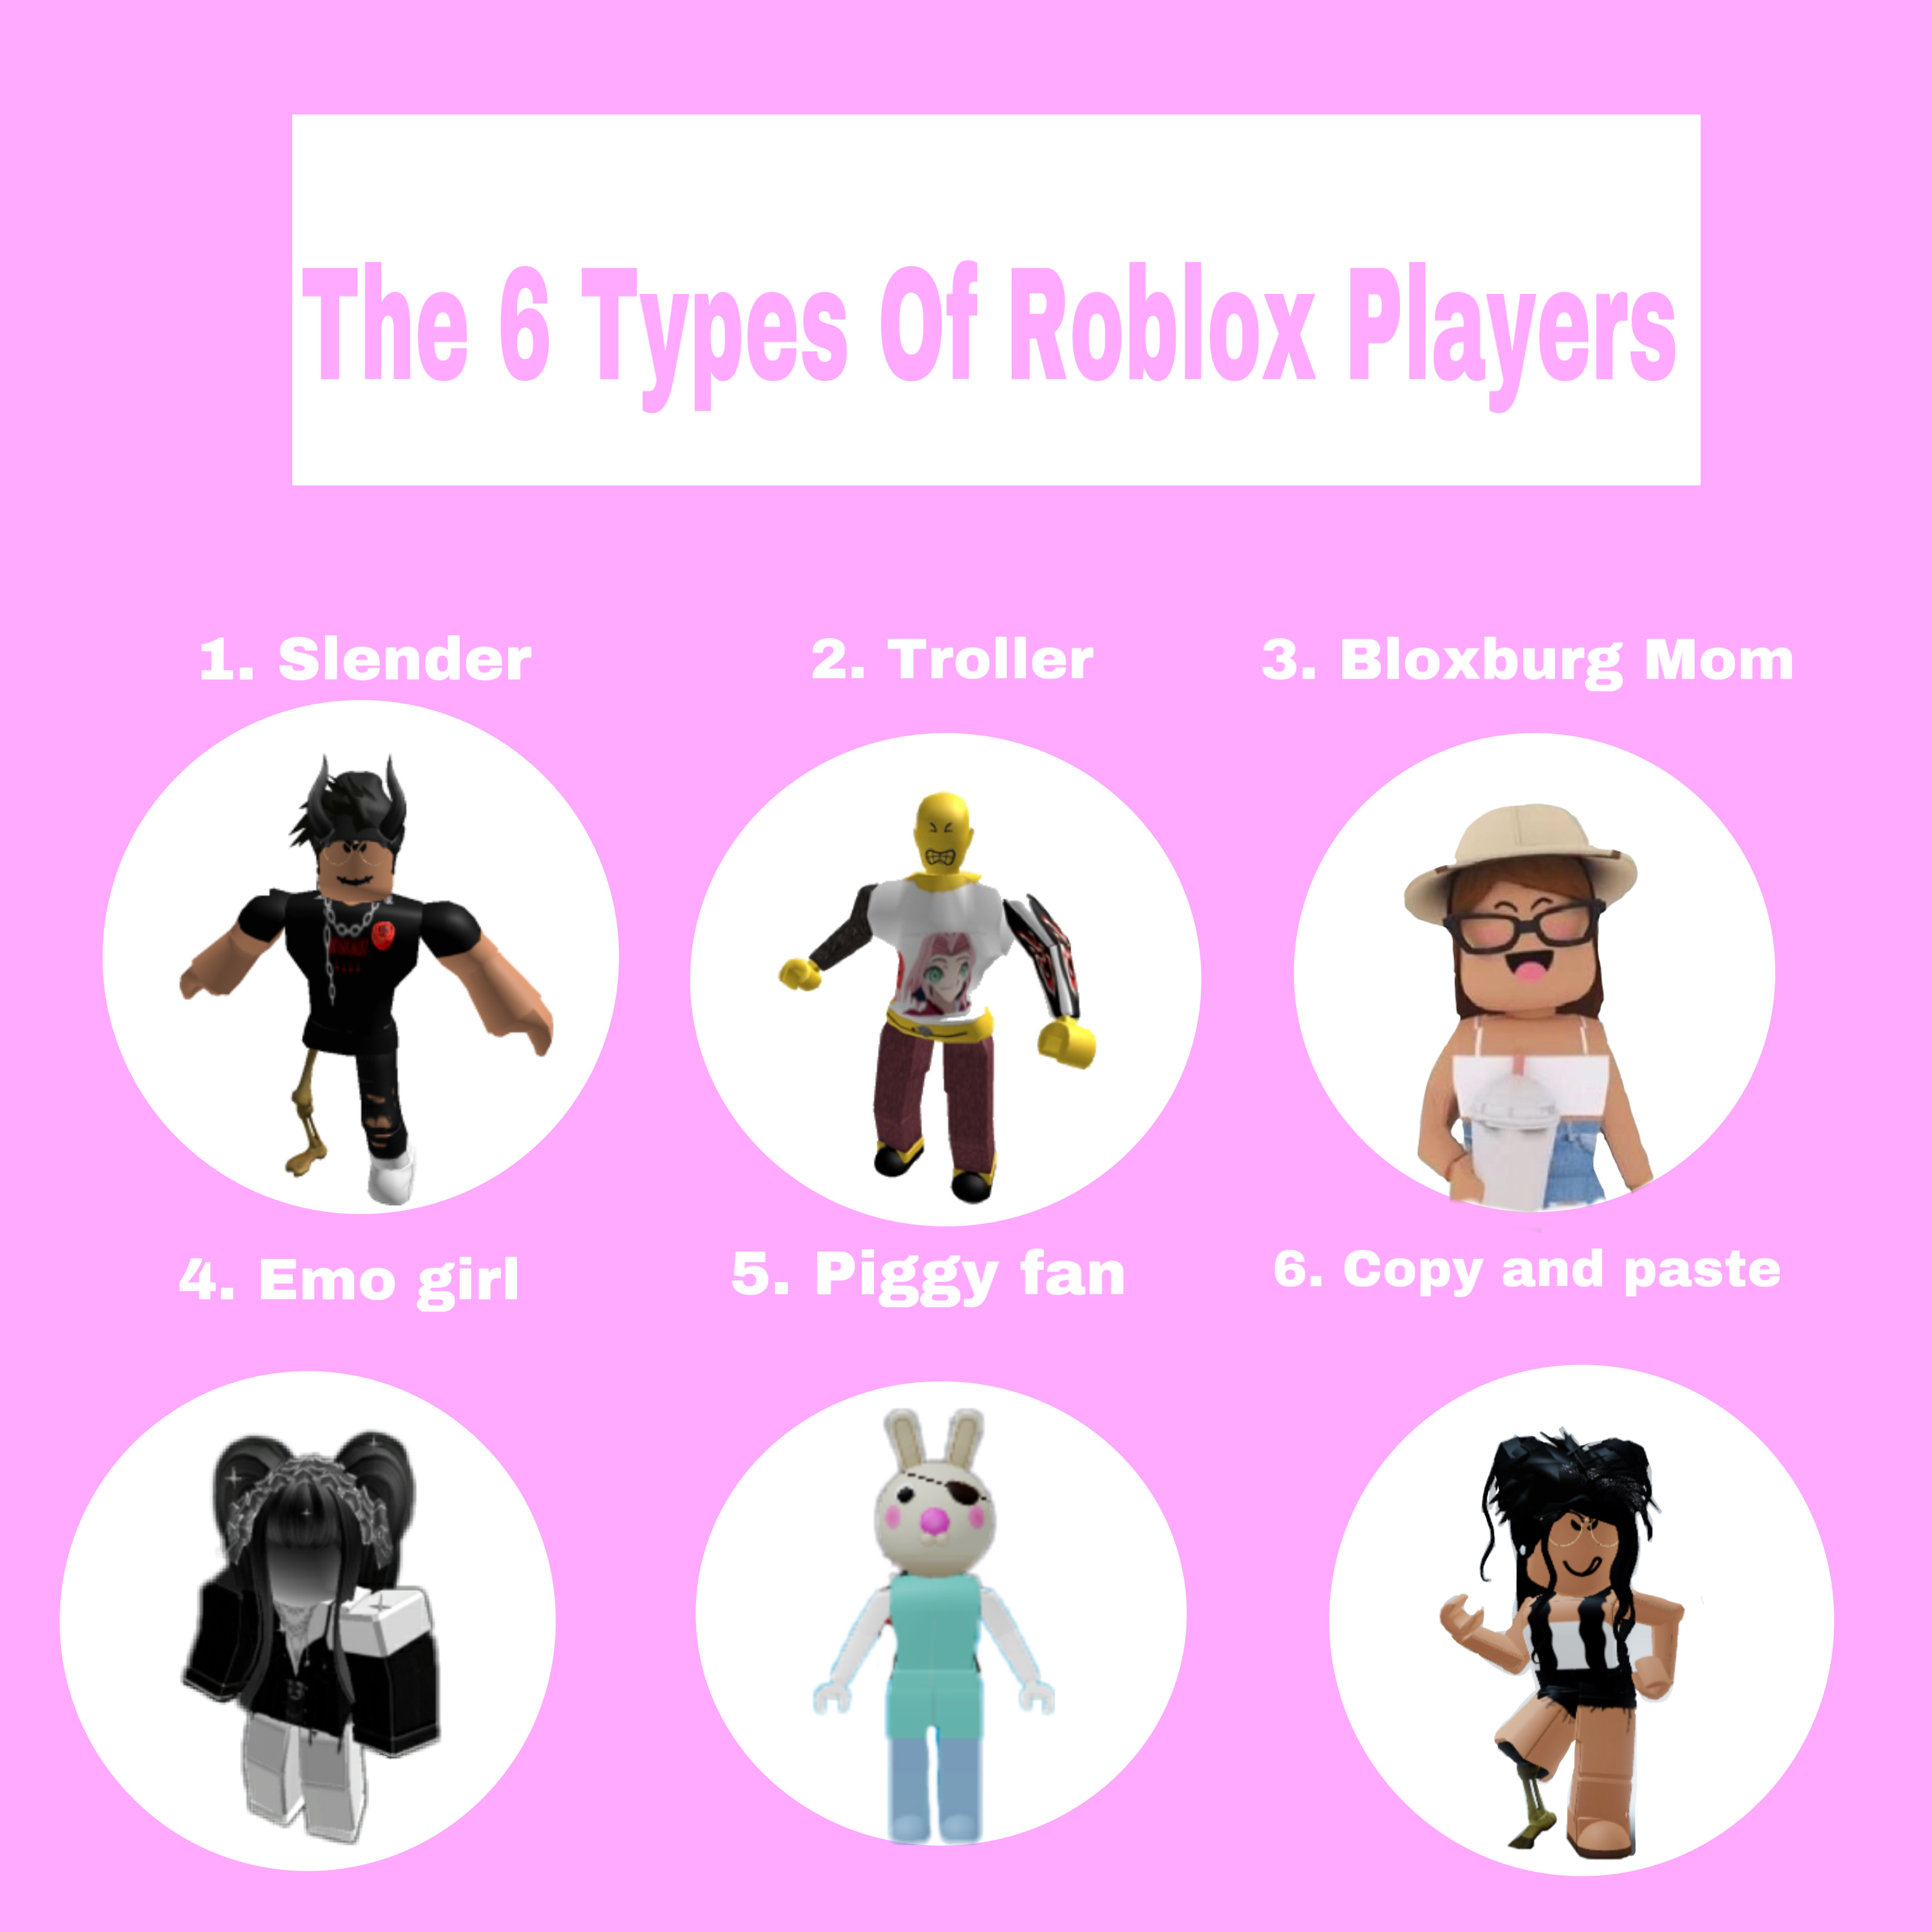 Roblox Slender Barb Piggy Flamingo Image By Tea Copy and pastes are sometimes rich and can mock players who don't have the same style. picsart